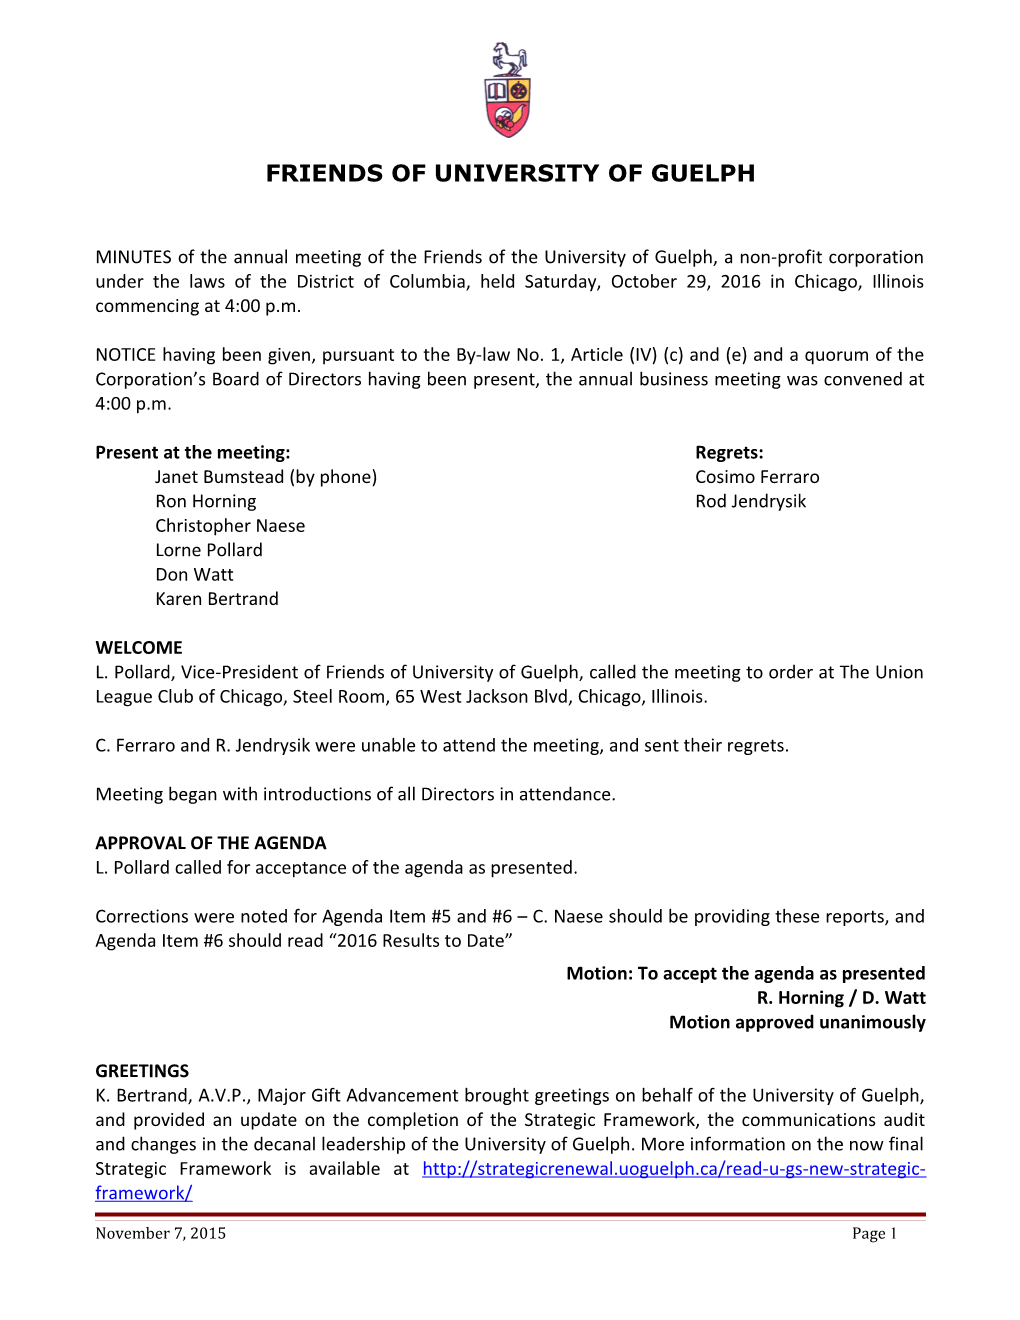 Friends of University of Guelph